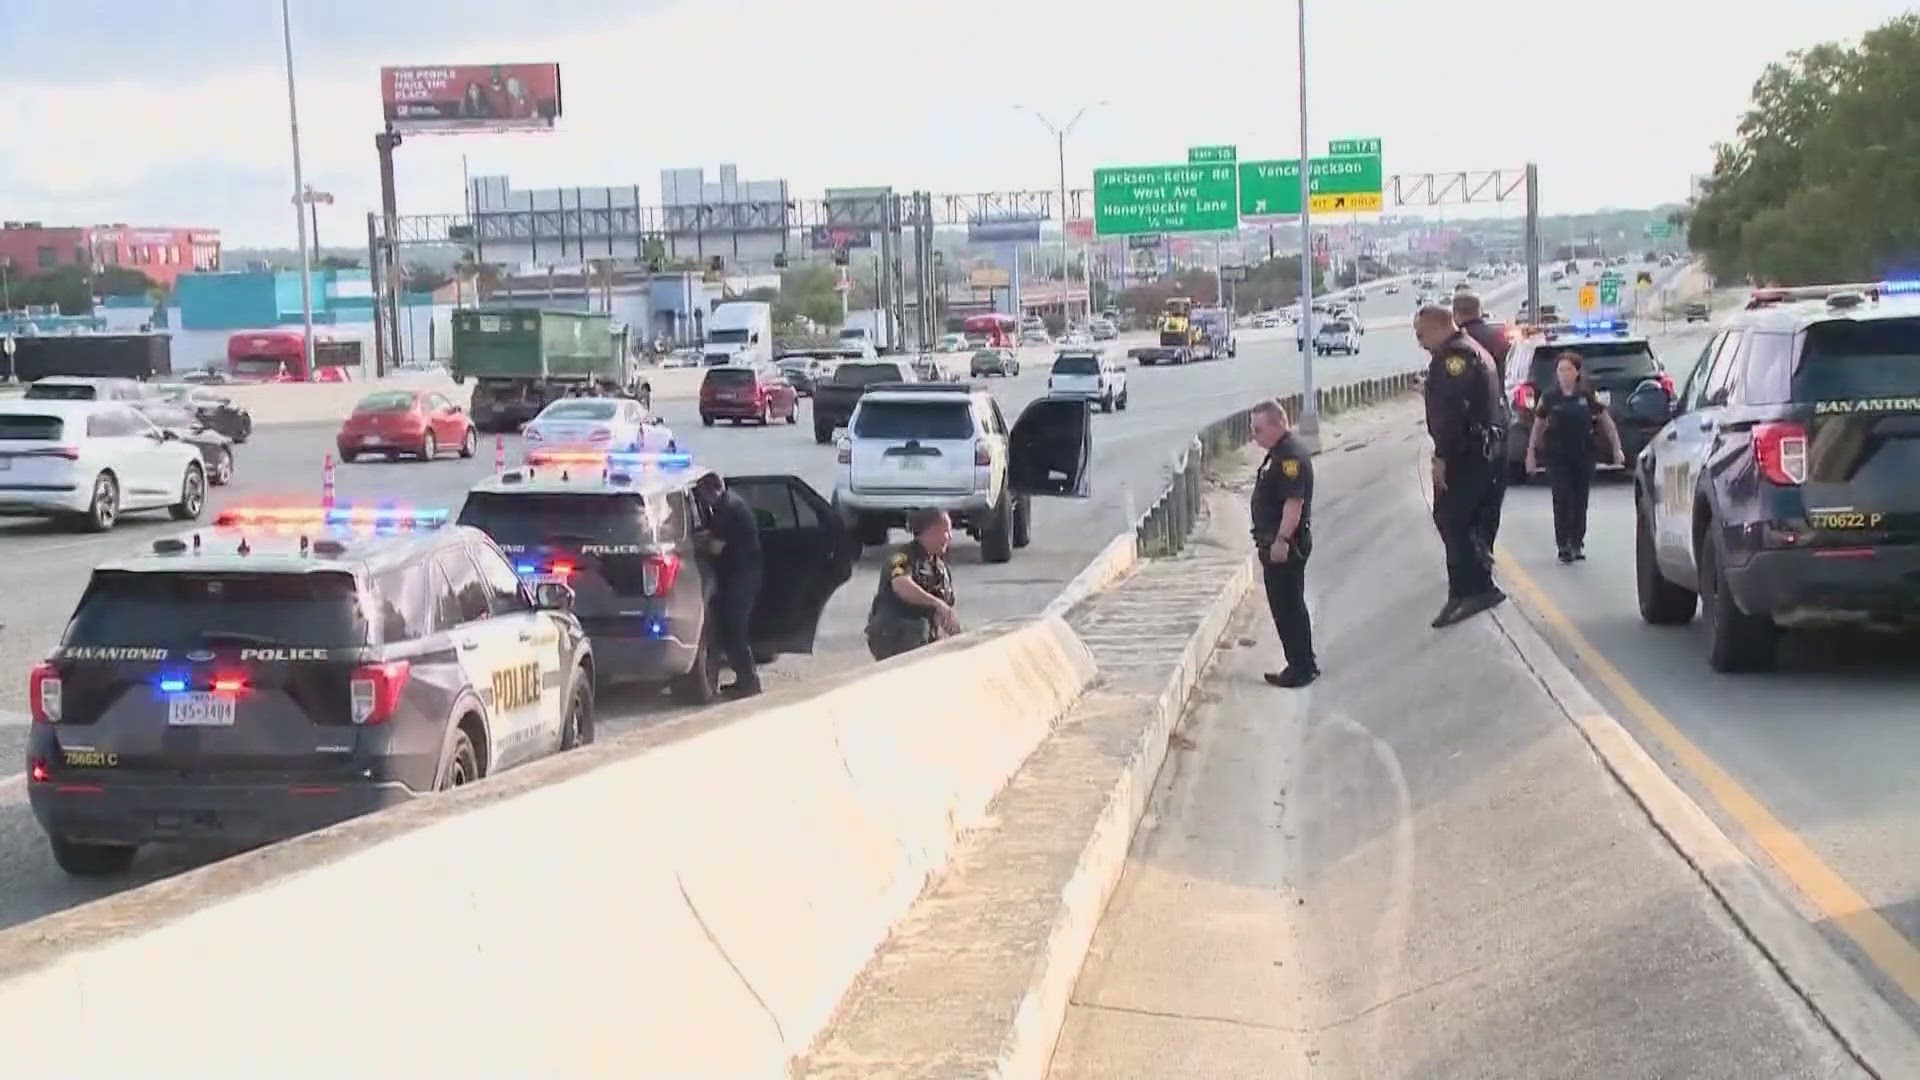 The incident occurred near Loop 410 on the 500 block of Cherry Ridge around 8 a.m. Friday.